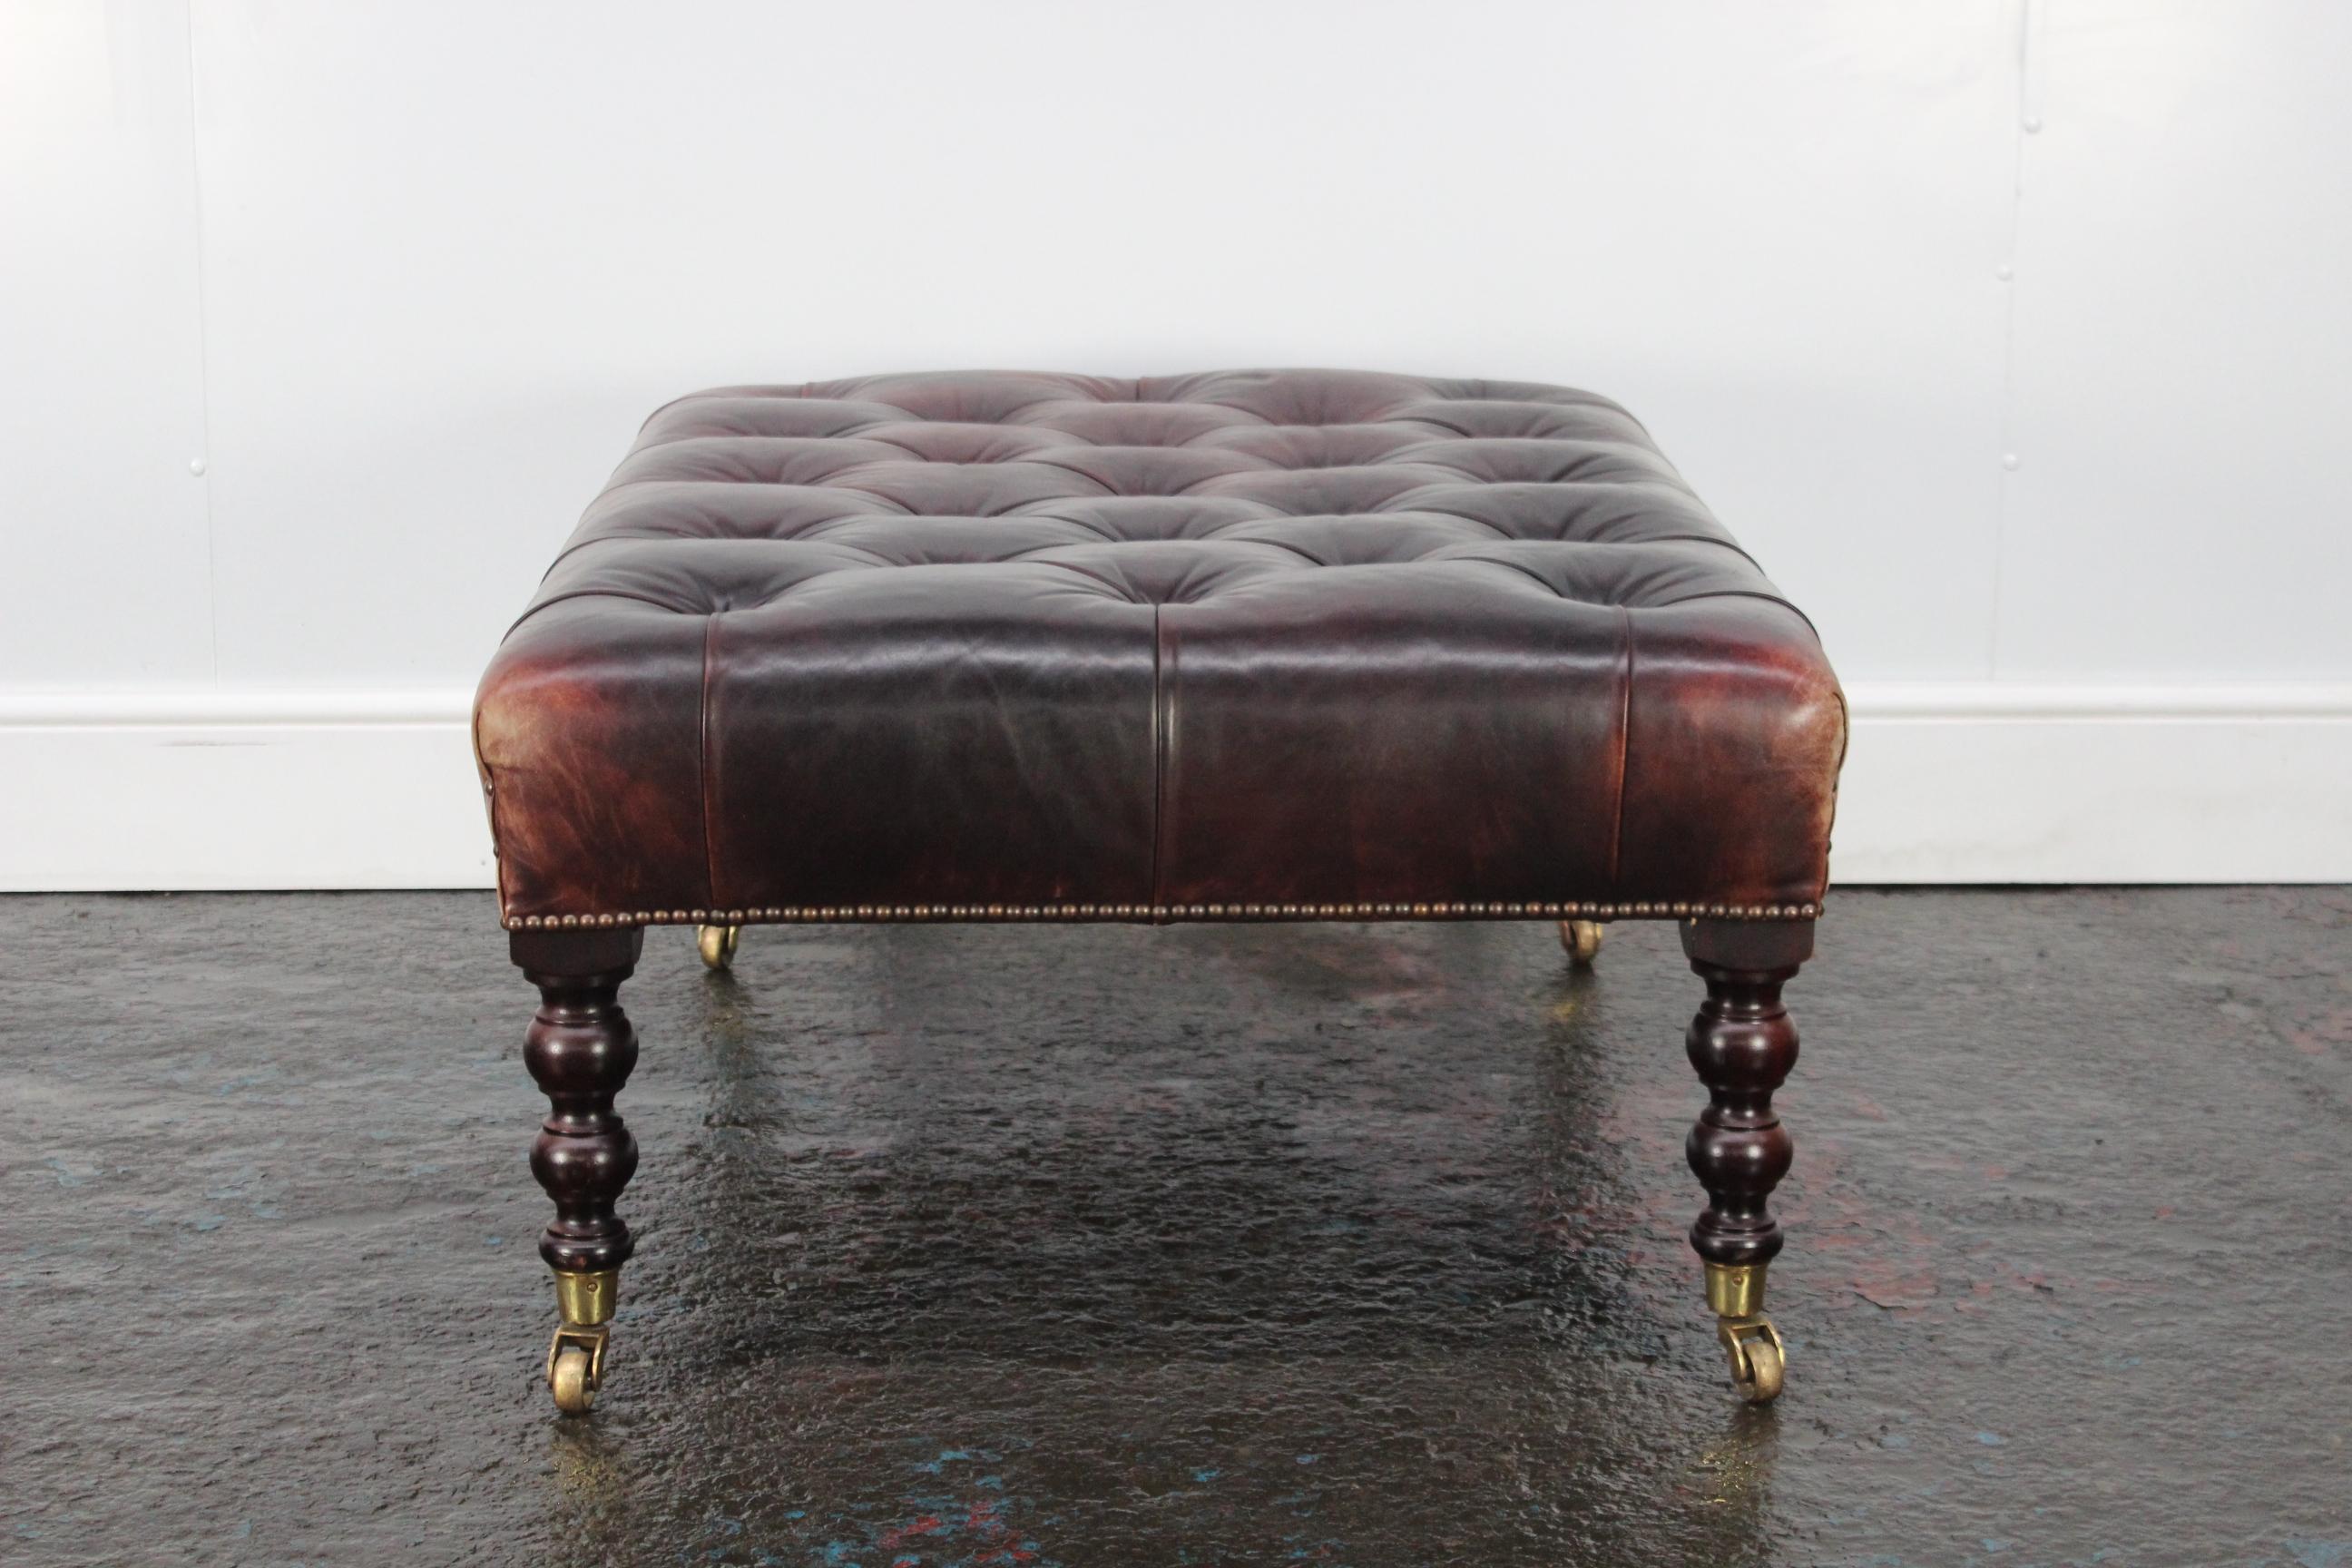 Hand-Crafted George Smith “Signature” Buttoned Footstool in Sublime Oxblood Leather